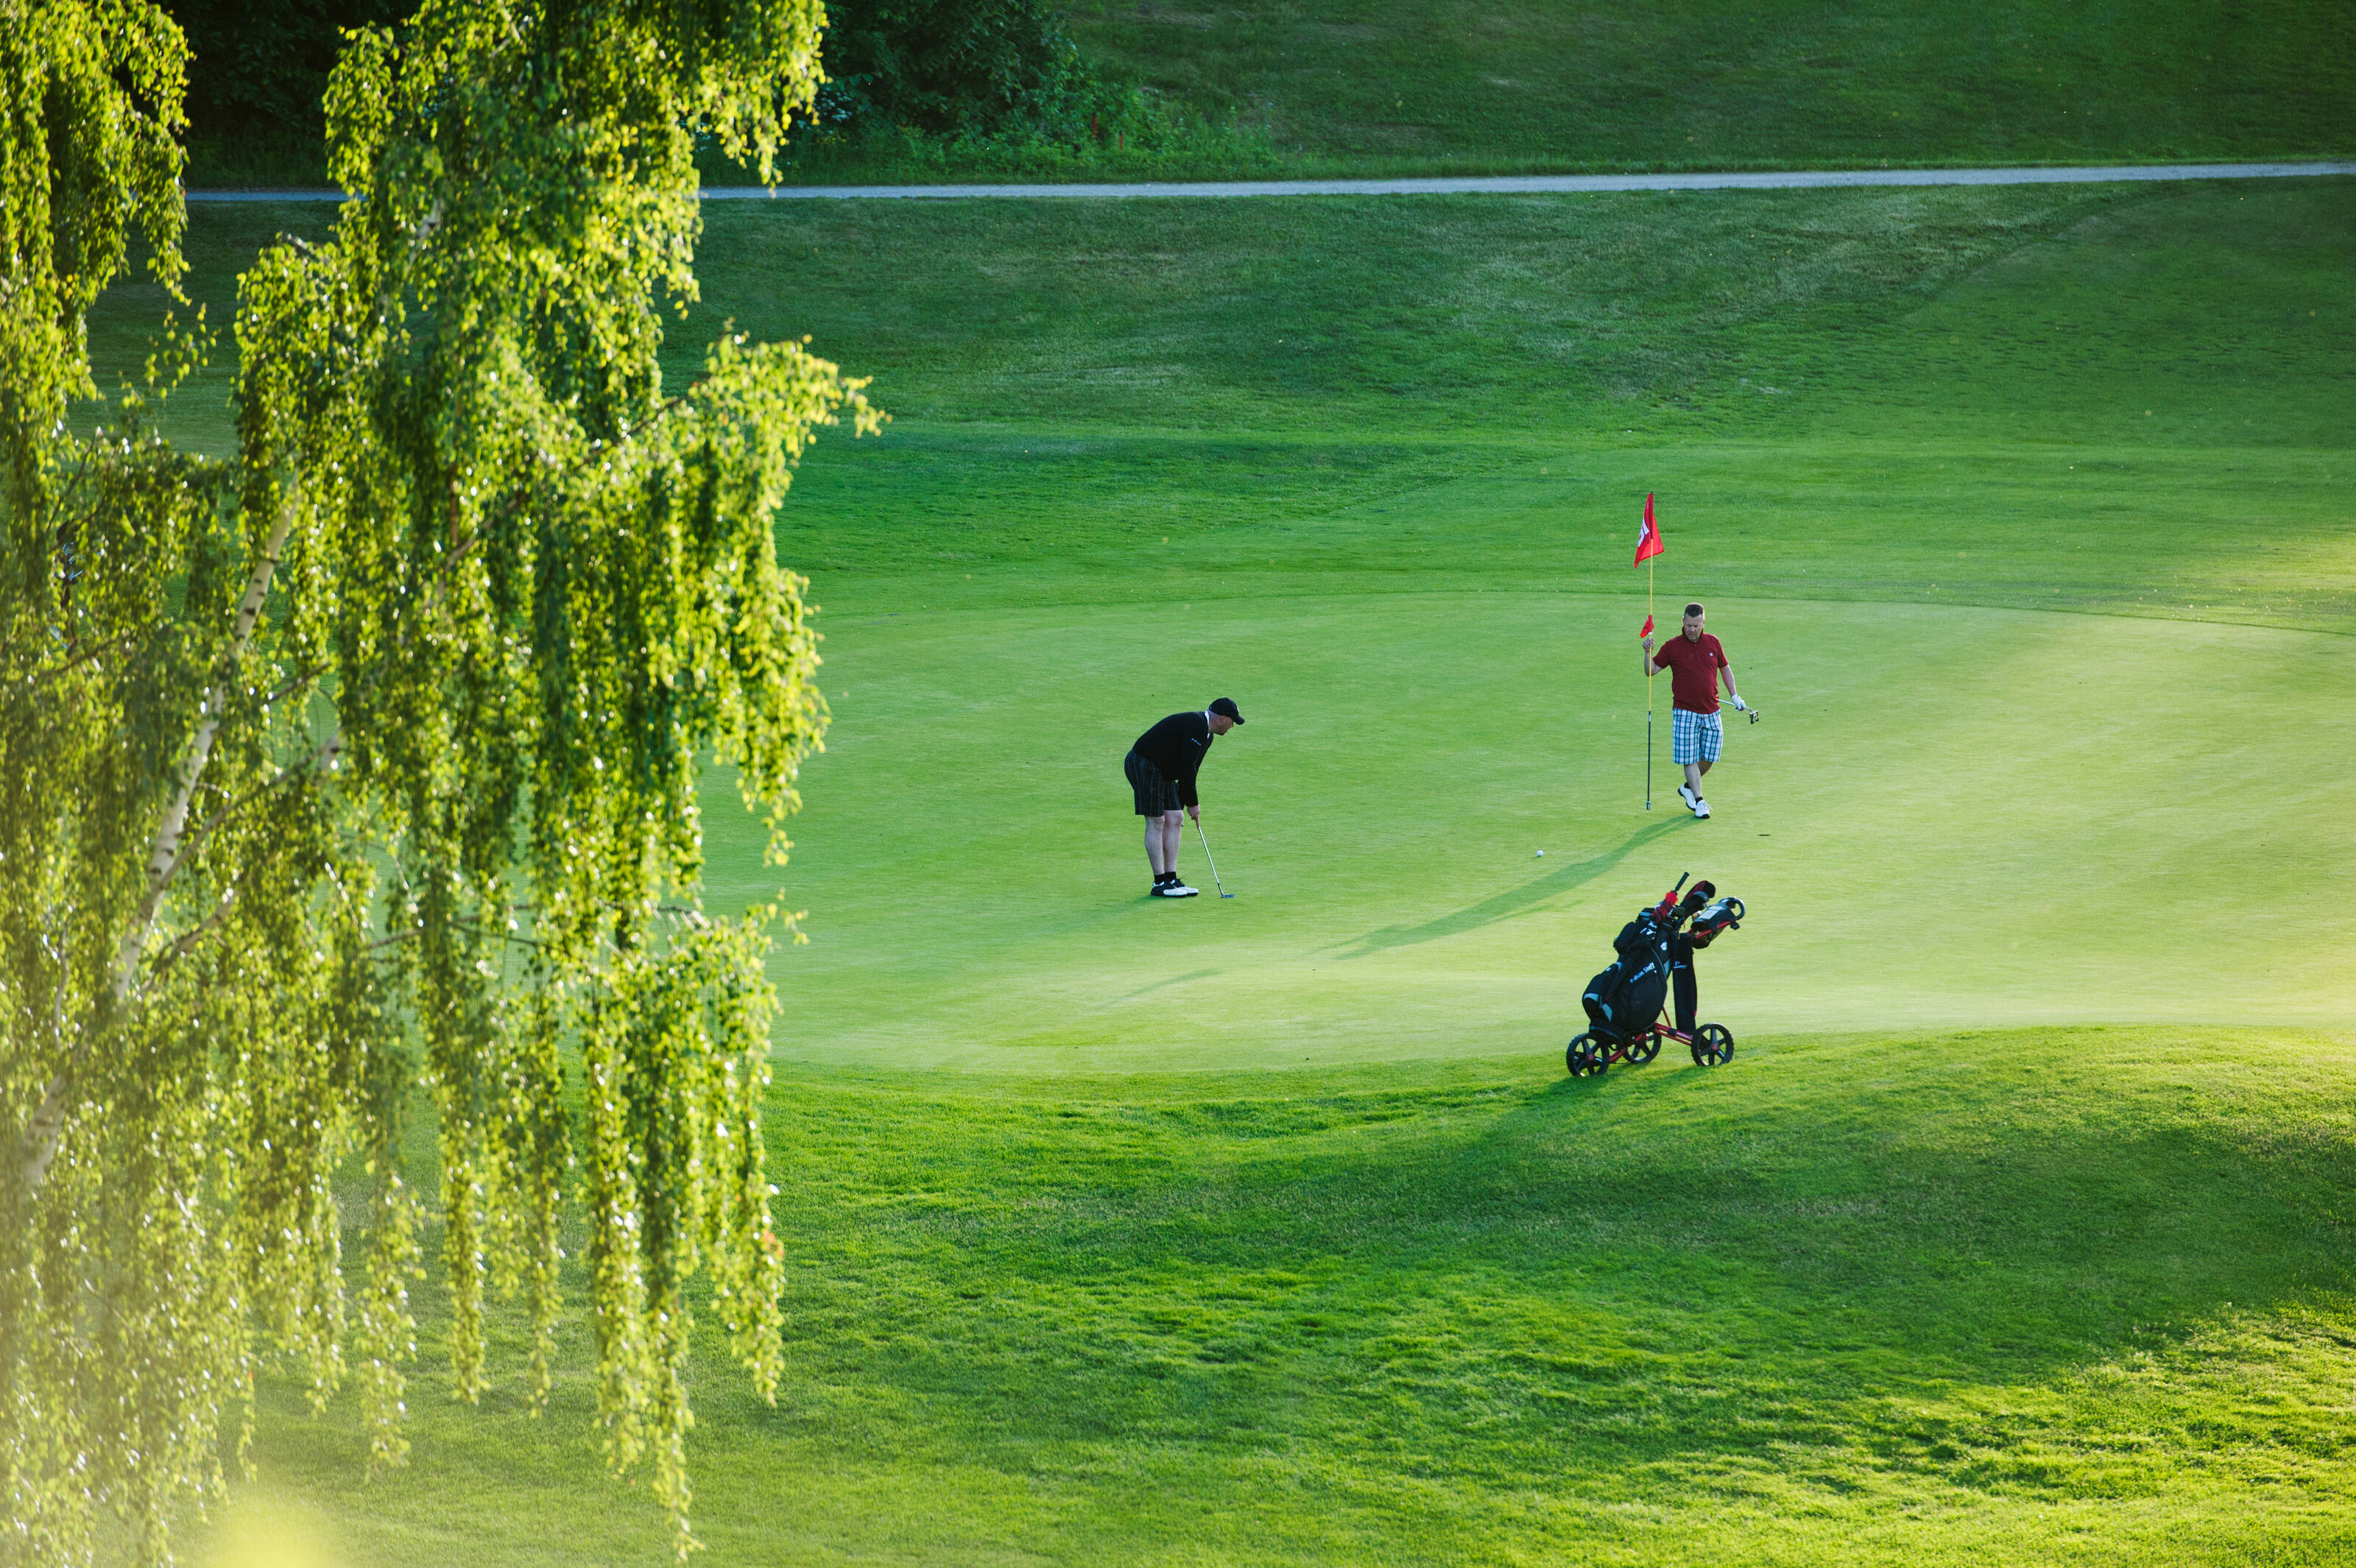 A golfer hits the ball on a golf course in Finland.